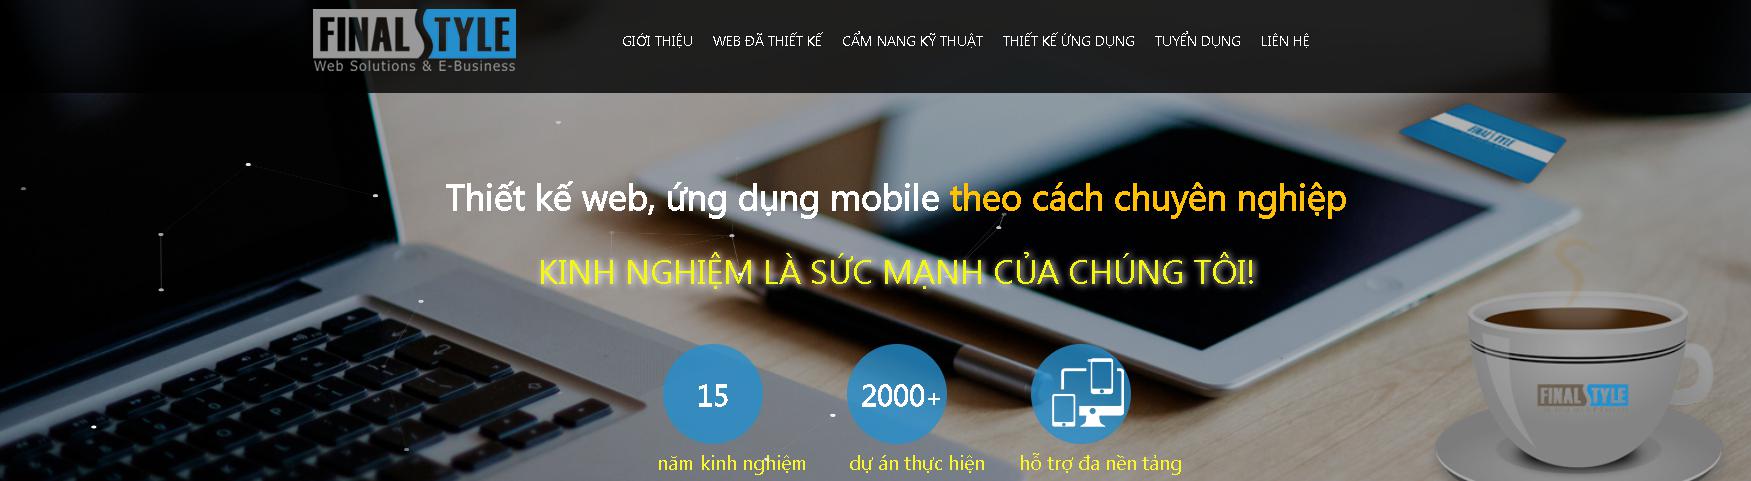 Công ty thiết kế website FinalStyle